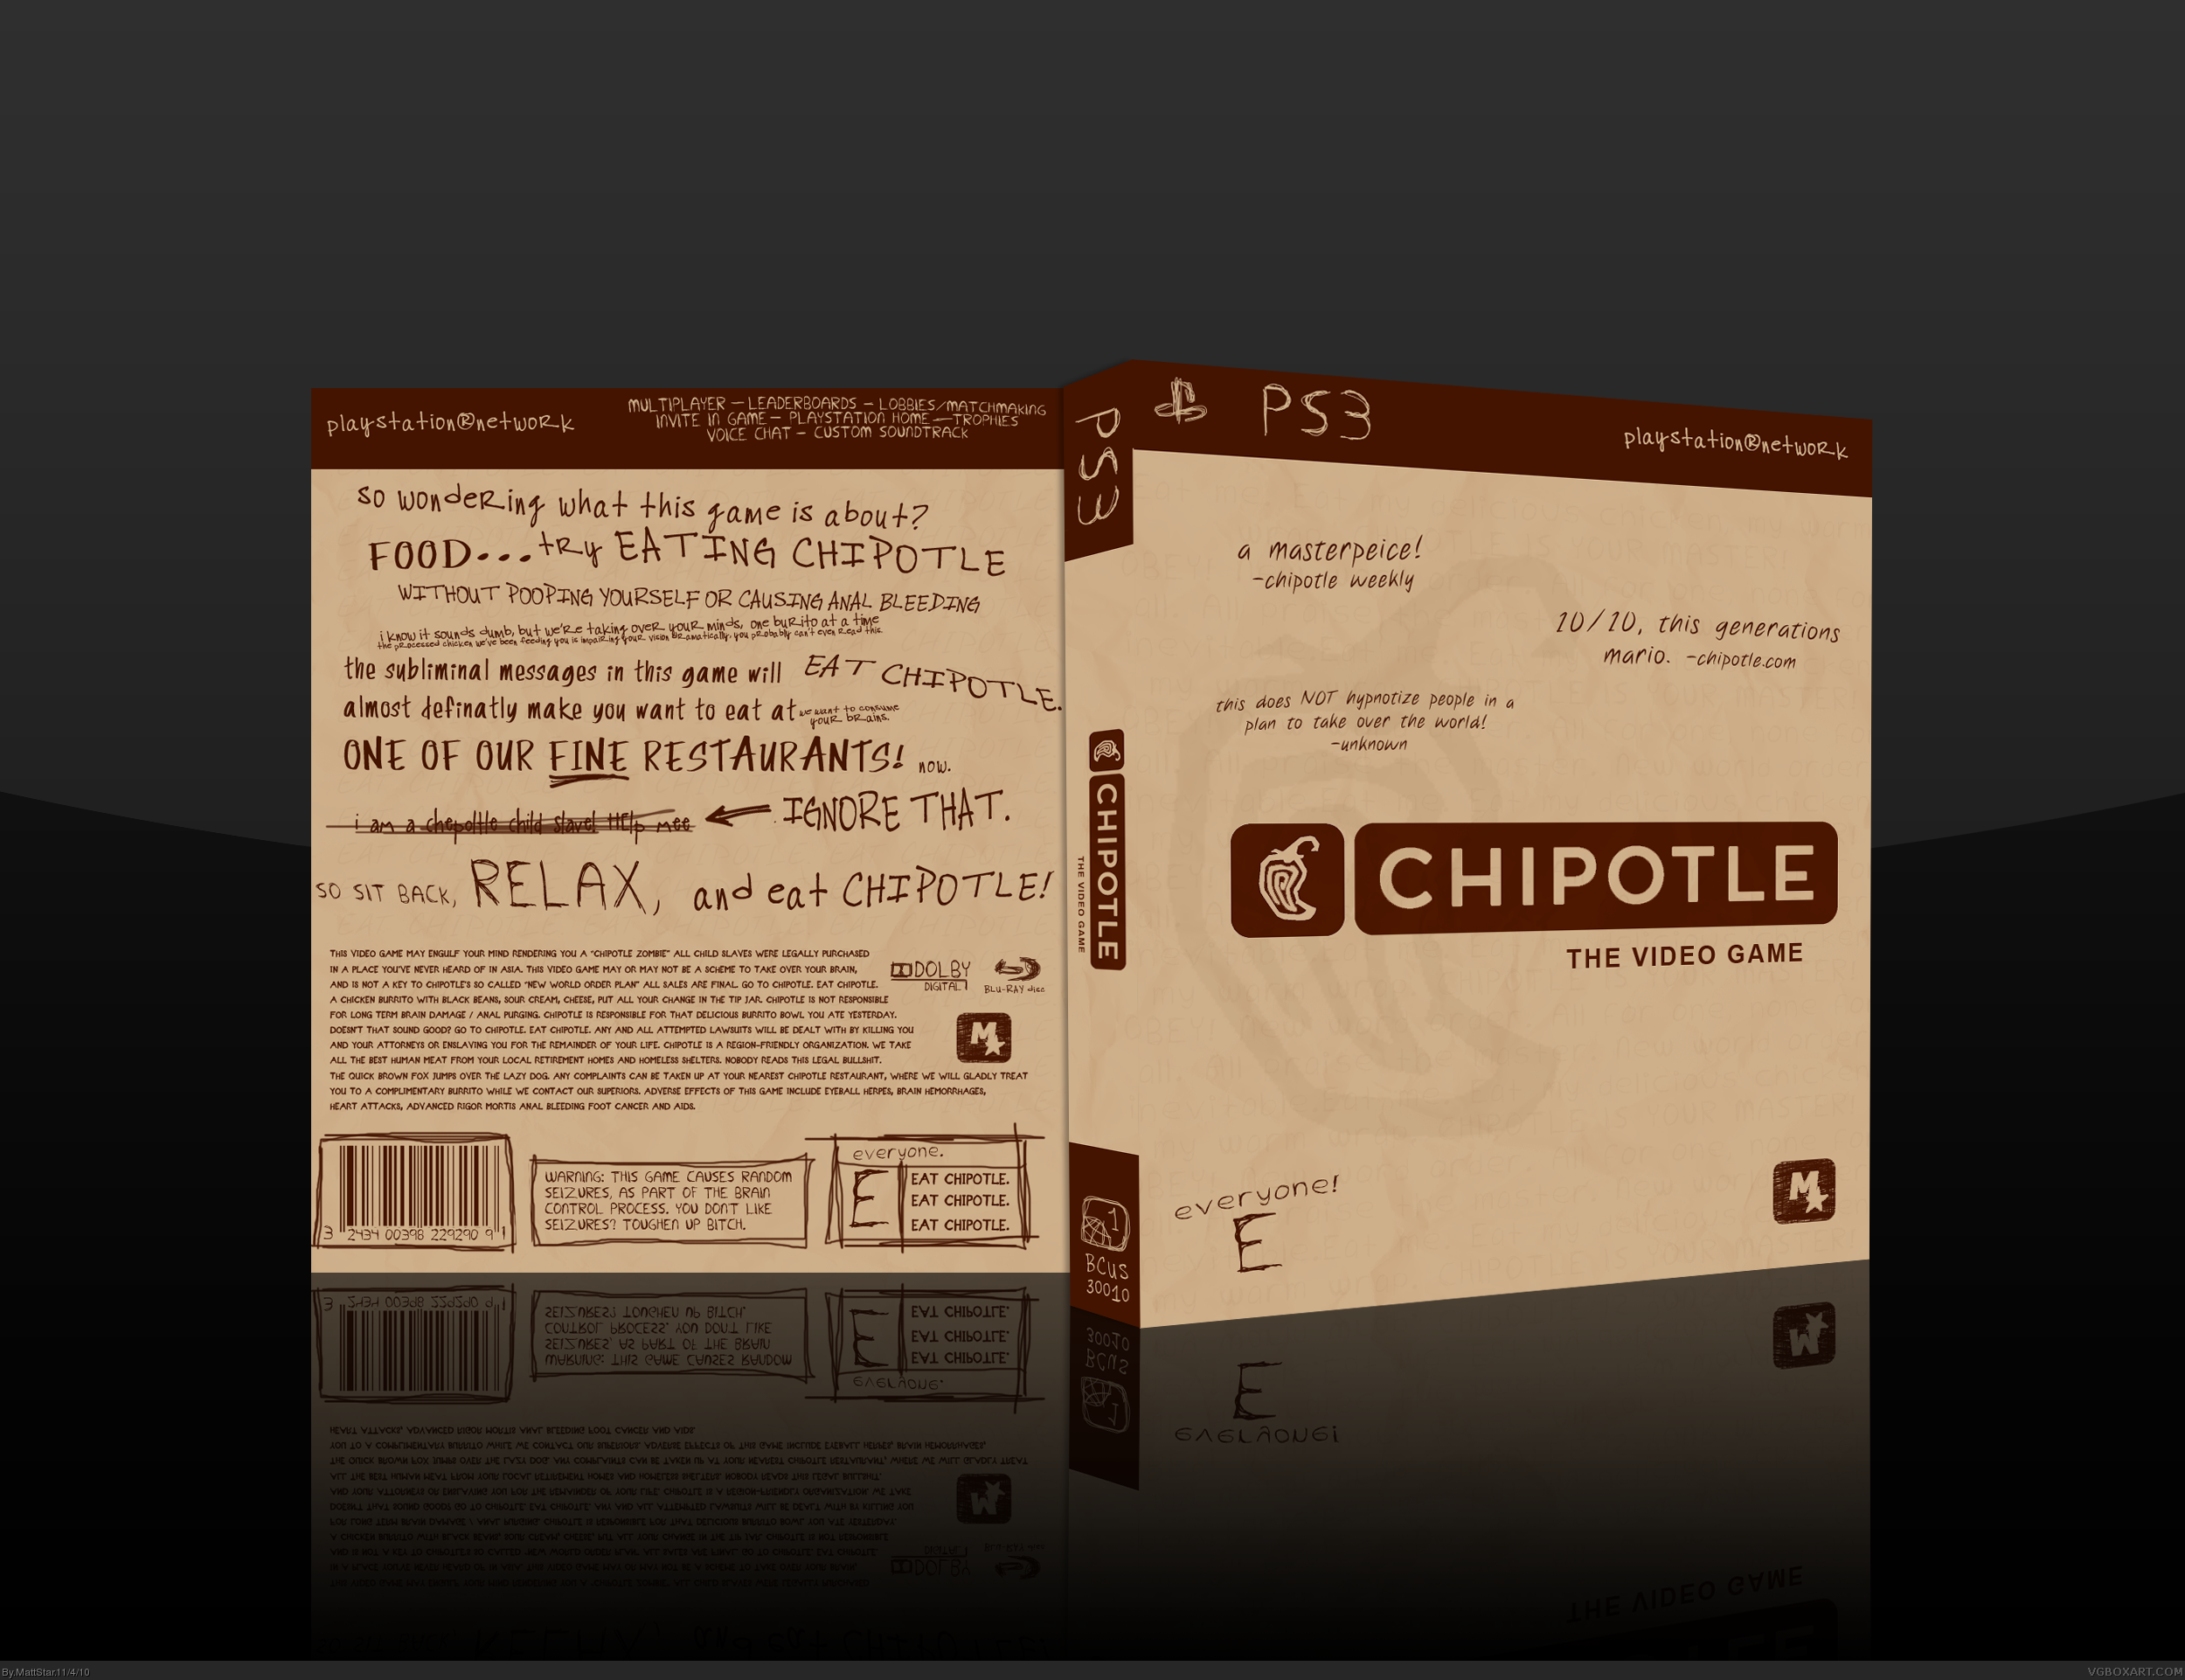 Chipotle: The Game box cover